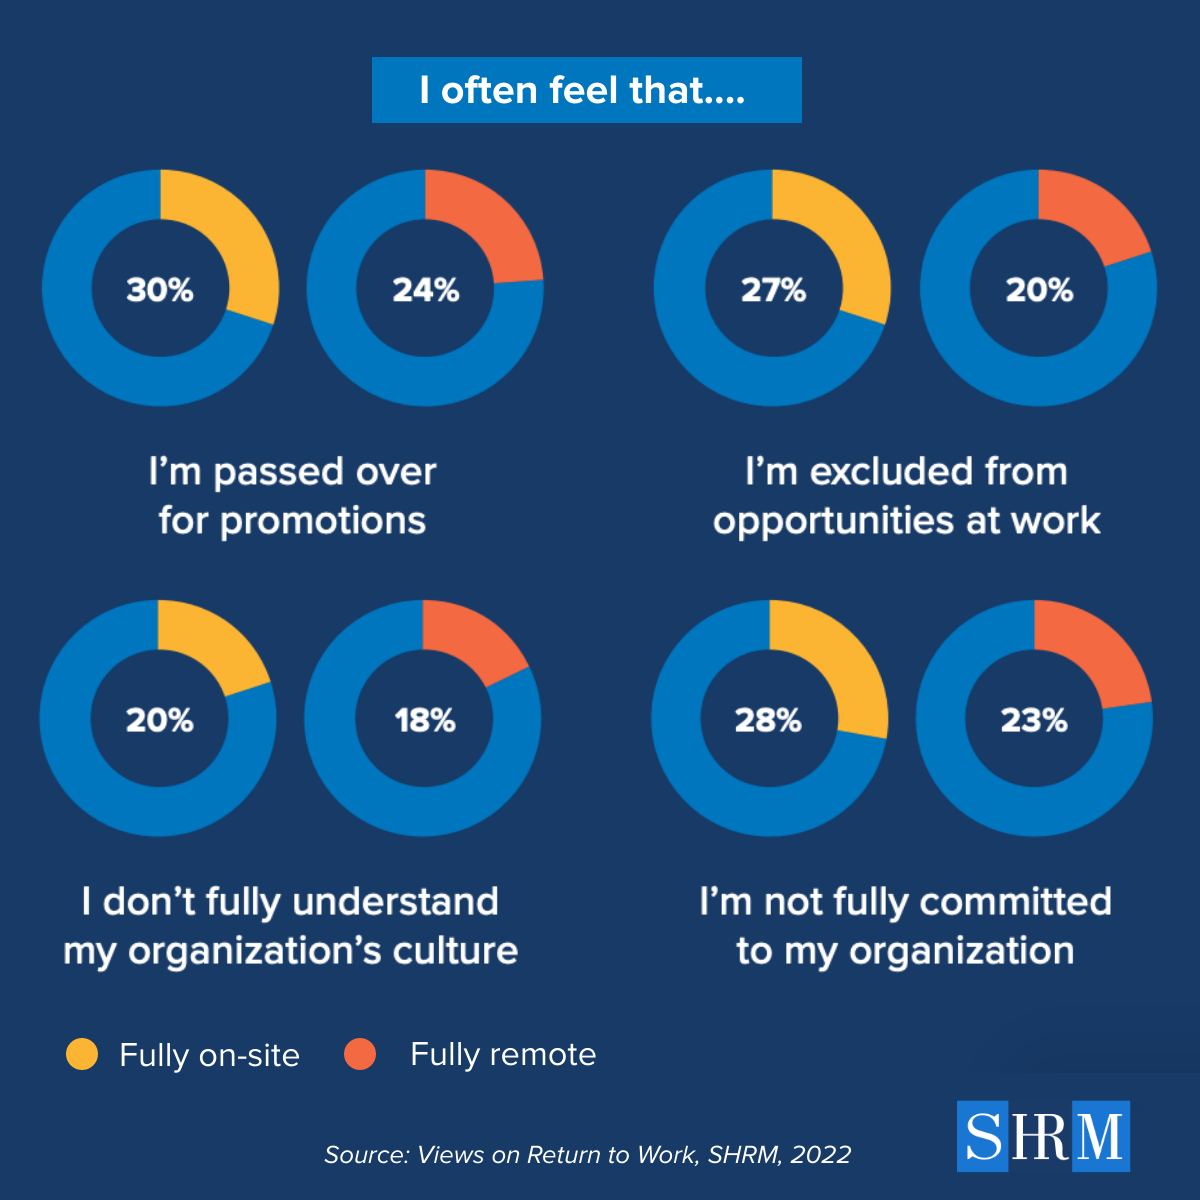 There is widespread belief that even though some jobs can be effectively done away from the office, employees are missing out on key aspects of the work experience. However, #SHRMResearch results show that many of these beliefs are unfounded. shrm.co/rmzf3e